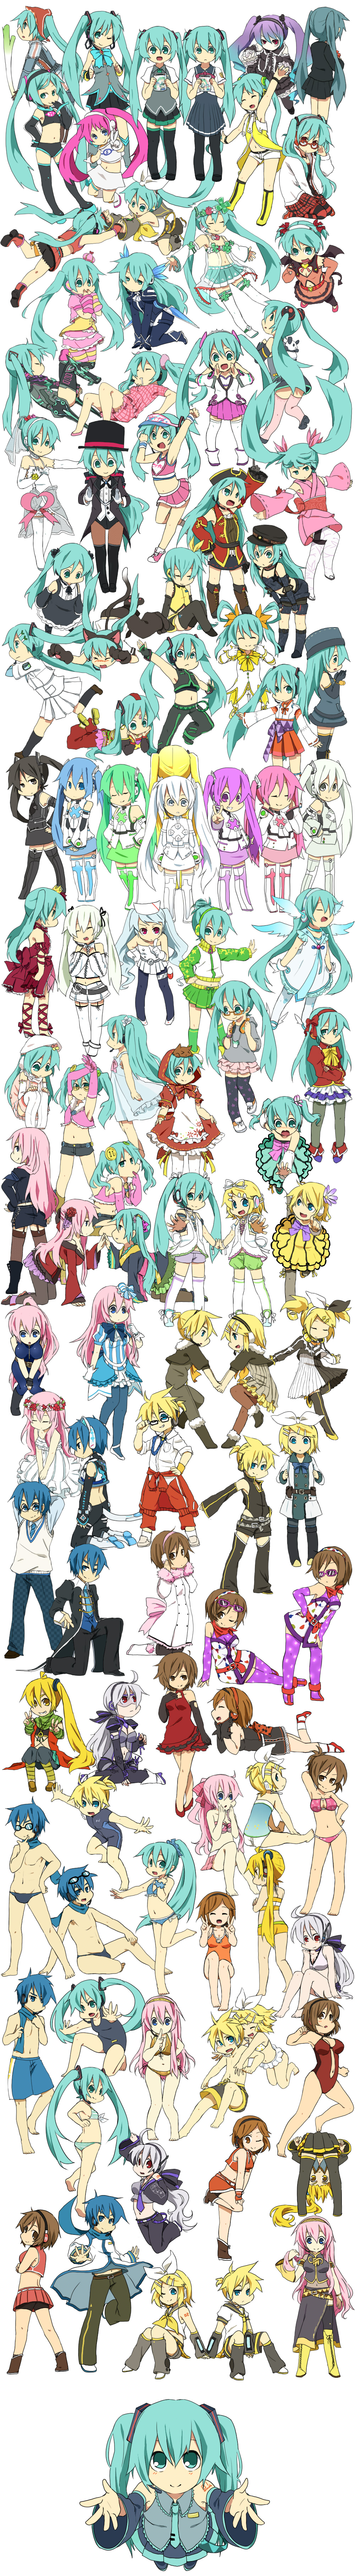 6+girls adjusting_glasses akita_neru alicia_melchiott alicia_melchiott_(cosplay) alternate_costume alternate_hair_color alternate_hairstyle animal_ears anti_the_holic_(vocaloid) aqua_eyes aqua_hair arabian_clothes arm_warmers armpits arms_behind_head arms_up back-to-back bangs bat_wings belt bent_over beret bespectacled bike_shorts bikini black_eyes black_hair black_legwear blonde_hair blue_hair blue_legwear blush bodysuit boots bracelet breasts brown_legwear buttons cat_ears cat_tail cheerleader choker cleavage closed_eyes coat colorful_x_melody_(vocaloid) cosplay crown detached_sleeves dress earmuffs earrings elbow_gloves everyone fetal_position fishnets flower frills garter_belt gathers glasses gloves gothic_lolita green_eyes green_hair green_legwear grimm's_fairy_tales hair_flower hair_ornament hairclip hajimete_no_koi_ga_owaru_toki_(vocaloid) harem_pants hat hato_(vocaloid) hatsune_miku hatsune_miku_no_gekishou_(vocaloid) head_wings head_wreath headphones headset heart high_heels highres jacket jacket_around_waist japanese_clothes jewelry just_be_friends_(vocaloid) kagamine_len kagamine_rin kagamine_rin_(cosplay) kaito kimono kocchi_muite_baby_(vocaloid) leg_warmers leggings little_red_riding_hood little_red_riding_hood_(cosplay) little_red_riding_hood_(grimm) lolita_fashion long_hair looking_back looking_up magnet_(vocaloid) megurine_luka meiko meiko_(cosplay) meltdown_(vocaloid) midriff miracle_paint_(vocaloid) multicolored_legwear multiple_girls multiple_persona navel necktie neko_cyber nurse_cap obi one-piece_swimsuit open_mouth pajamas panda pants pantyhose paw_gloves paws piapro pink_hair pink_legwear pirate plaid polka_dot ponytail pose print_legwear project_diva project_diva_2nd purple_eyes purple_legwear red_eyes reki_(arequa) retro roshin_yuukai_(vocaloid) running saihate_(vocaloid) sailor_collar sakine_meiko saliva scarf school_swimsuit school_uniform see-through sega senjou_no_valkyria senjou_no_valkyria_1 shoes short_kimono short_shorts short_yukata shorts side_ponytail side_slit sitting skirt sleeping smile socks songover space_channel_5 speedo spring_onion star star_print striped striped_bikini striped_legwear striped_swimsuit sunglasses sweater_vest swim_trunks swimsuit tail thighhighs top_hat tripping tuxedo twintails ulala ulala_(cosplay) uneven_twintails v veil vertical_stripes vest visor_cap vocaloid voyakiloid wetsuit white_eyes white_hair white_legwear winged_shoes wings wristband yellow_(vocaloid) young yowane_haku yukata